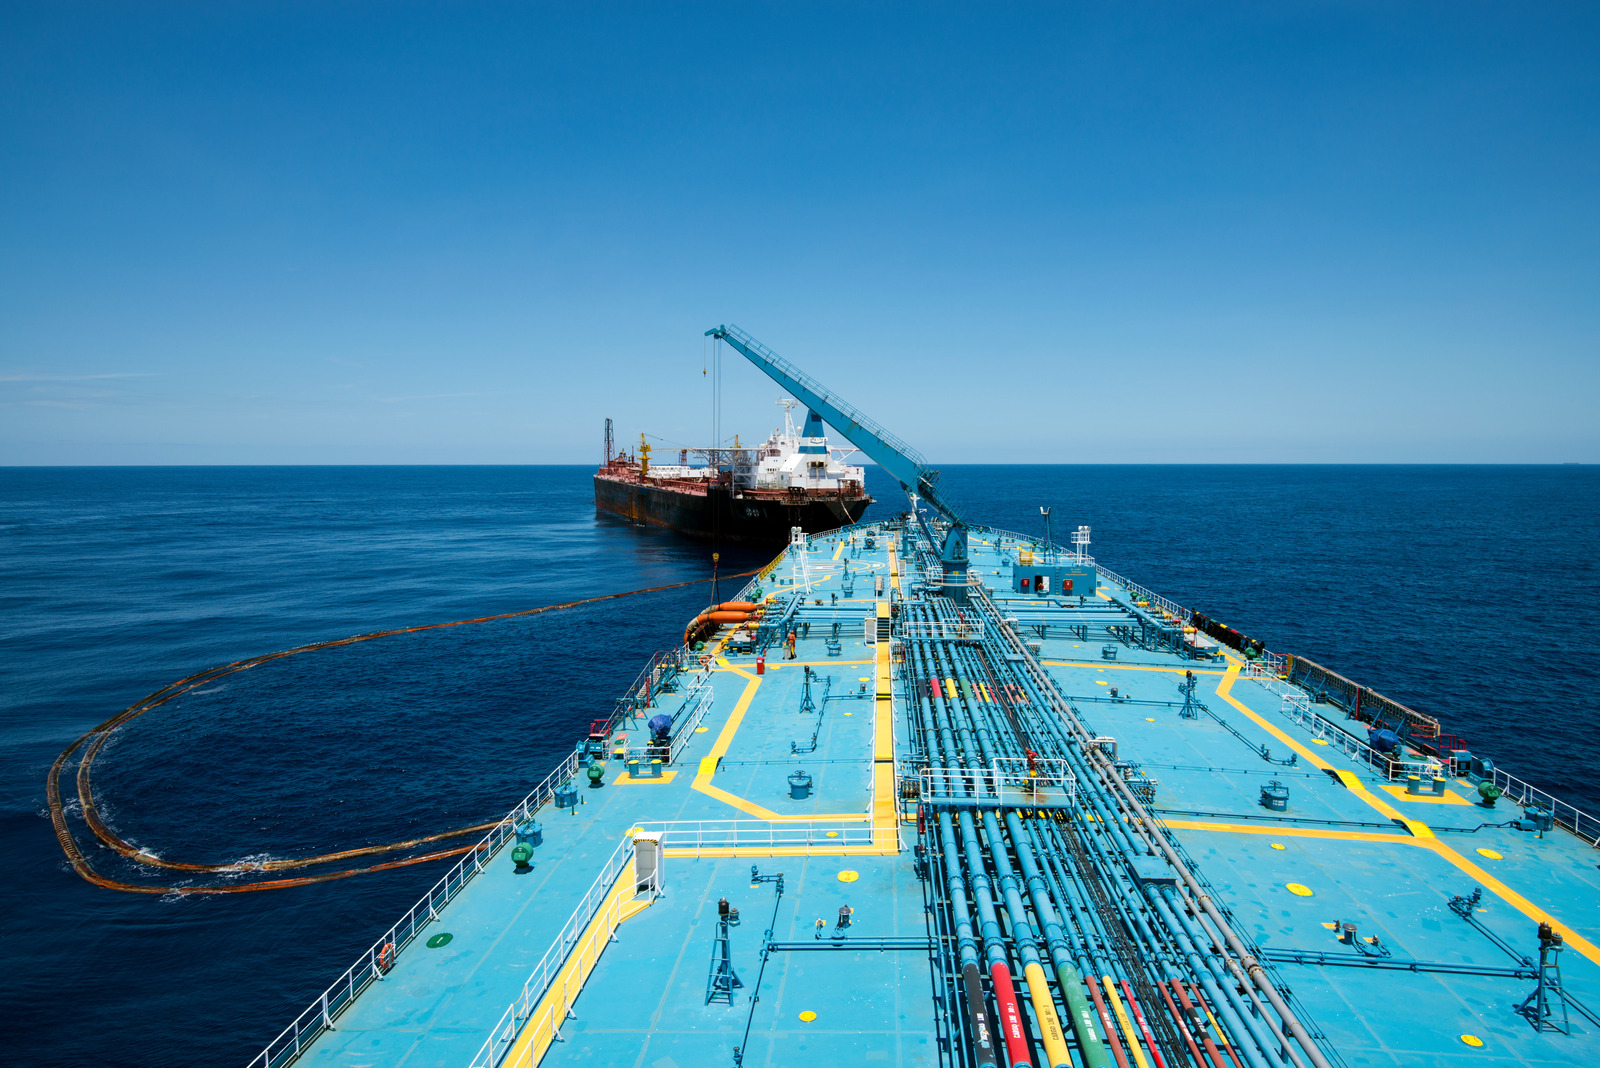 GMCG secures contract for a major FPSO project in Asia